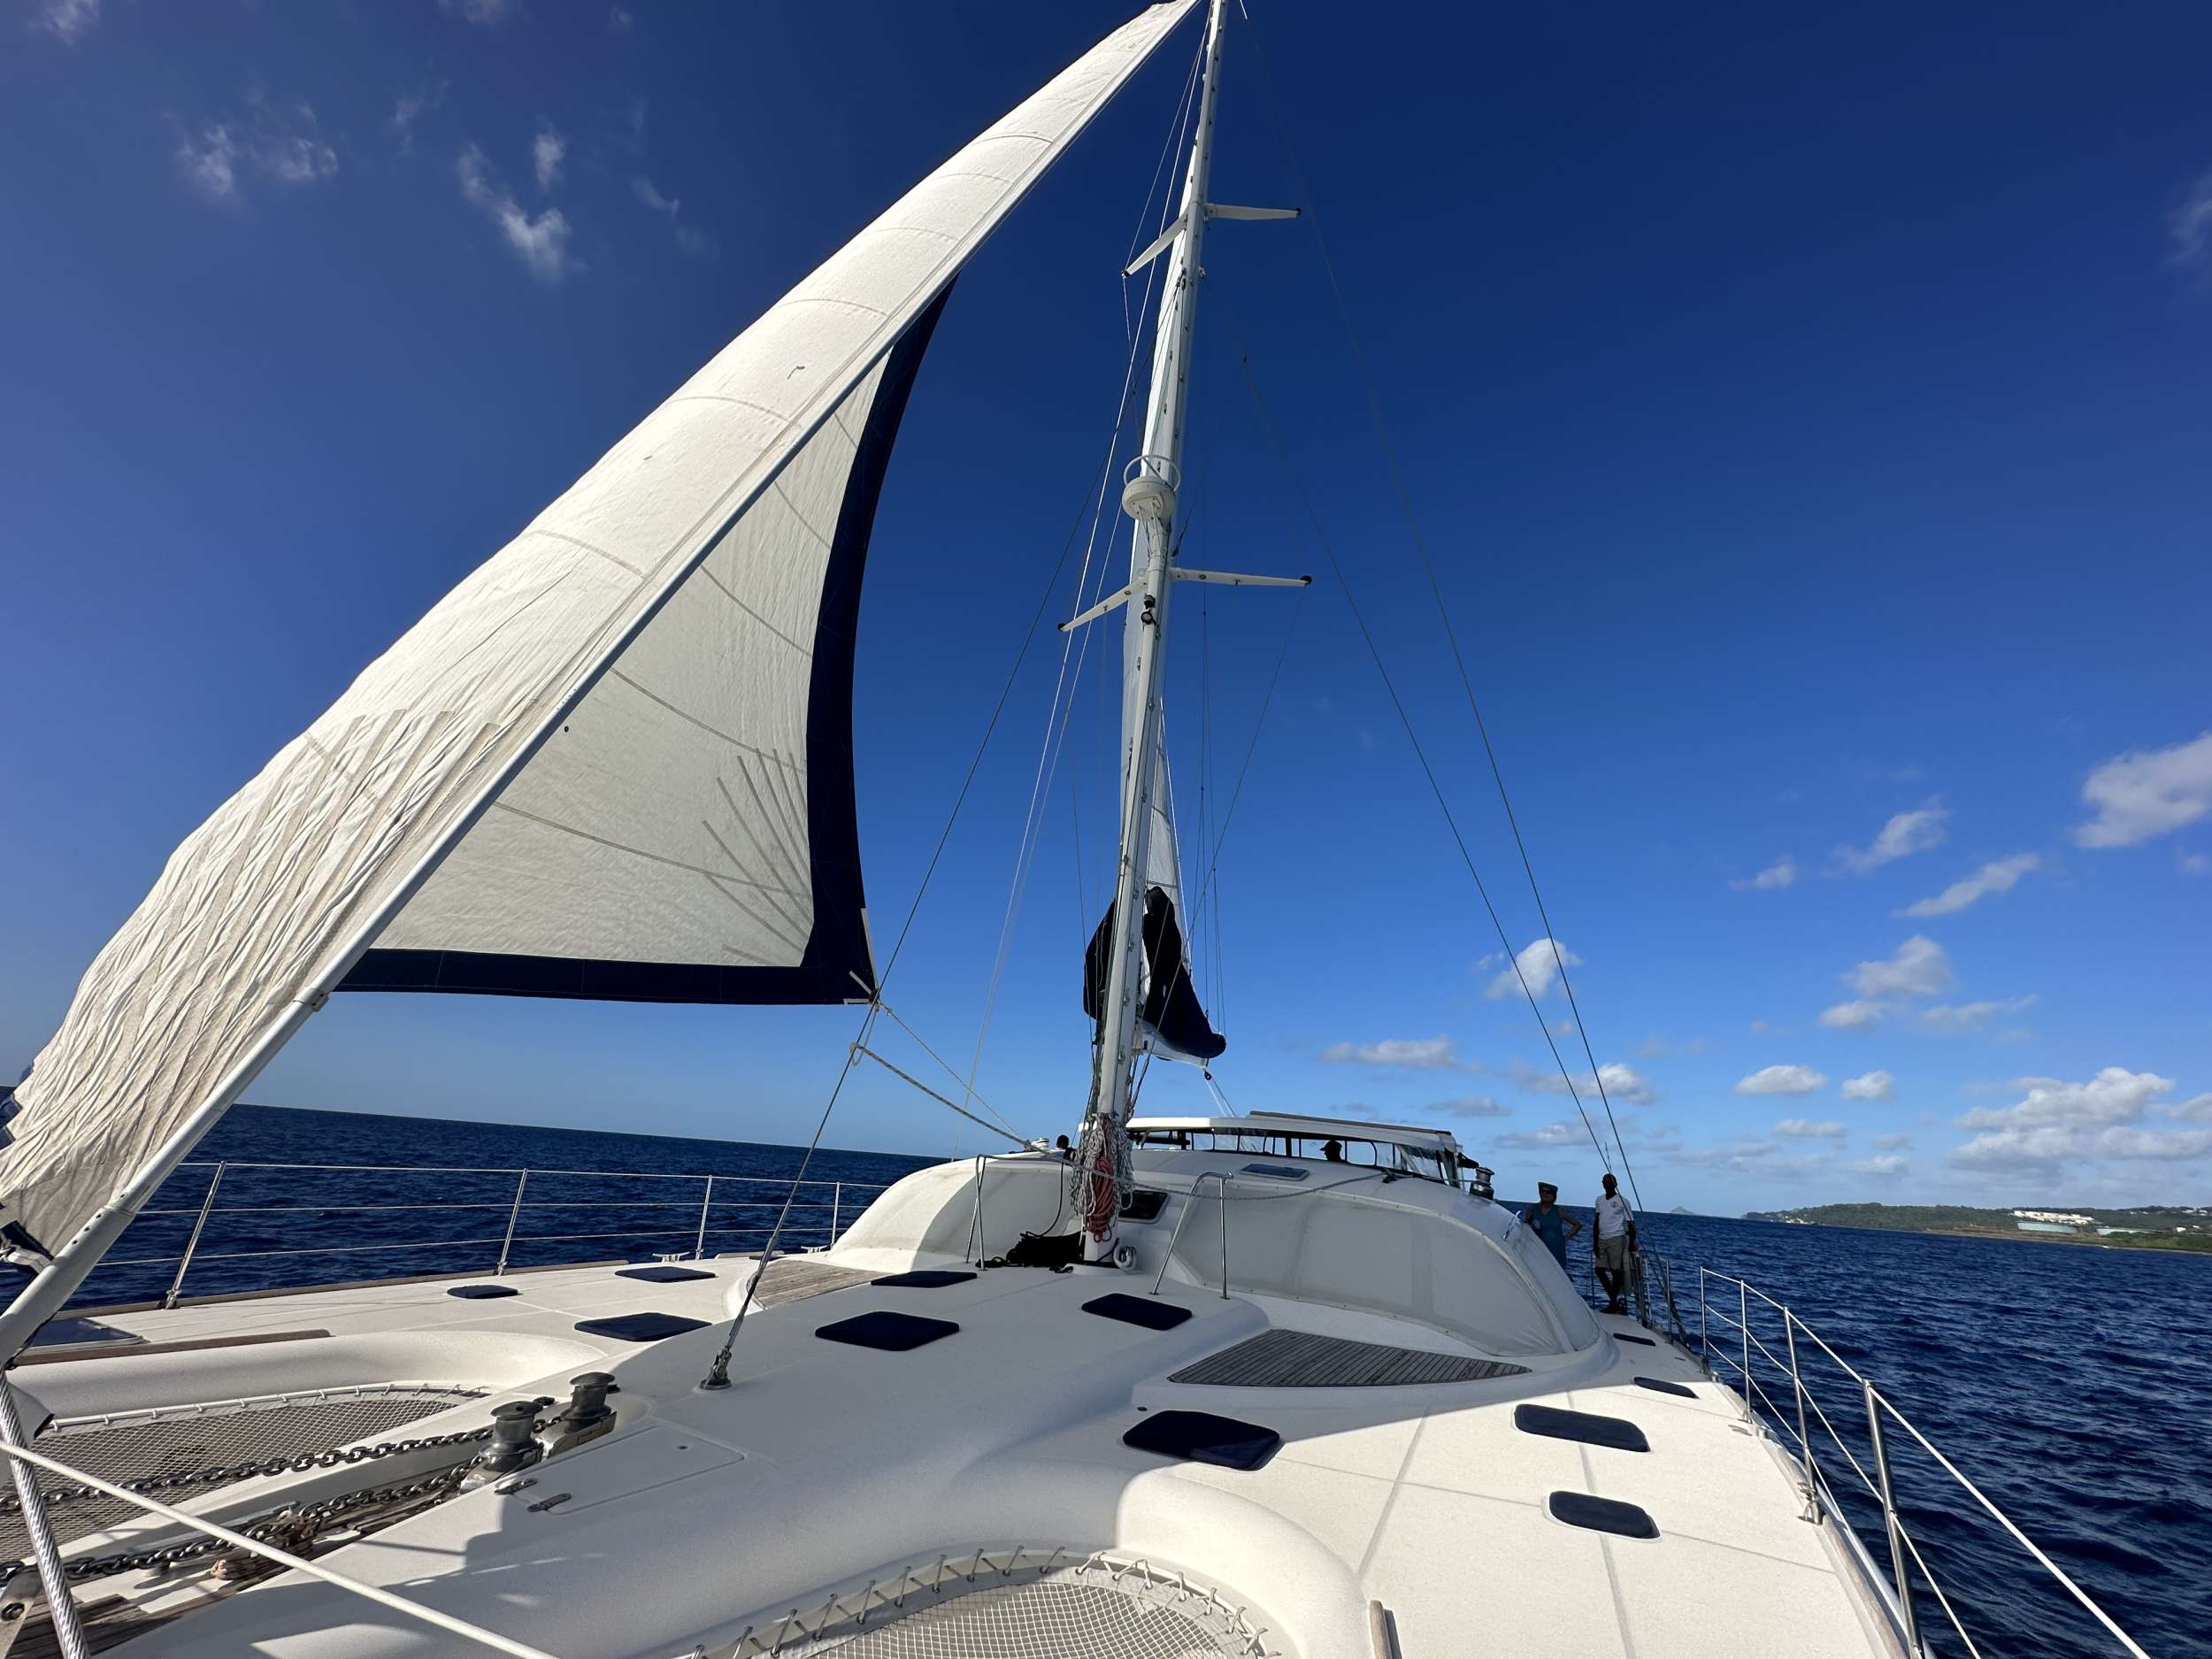 Lady Marigot - Yacht Charter East End Bay & Boat hire in Caribbean 1